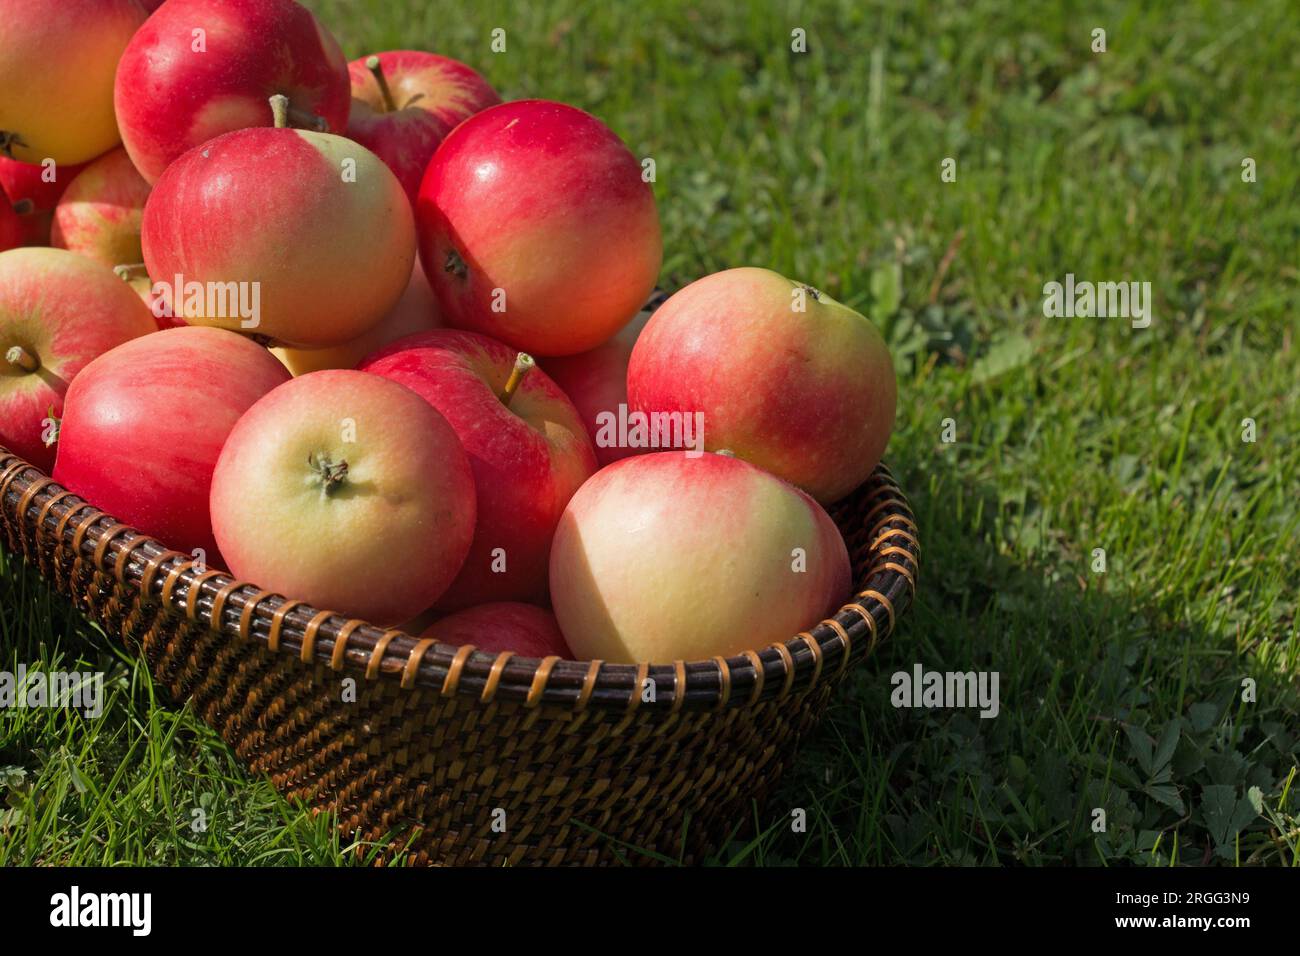 Ripe red Discovery eating apples, Malus domestica, apple fruits summer harvest, in a wicker basket on green grass, close-up view Stock Photo